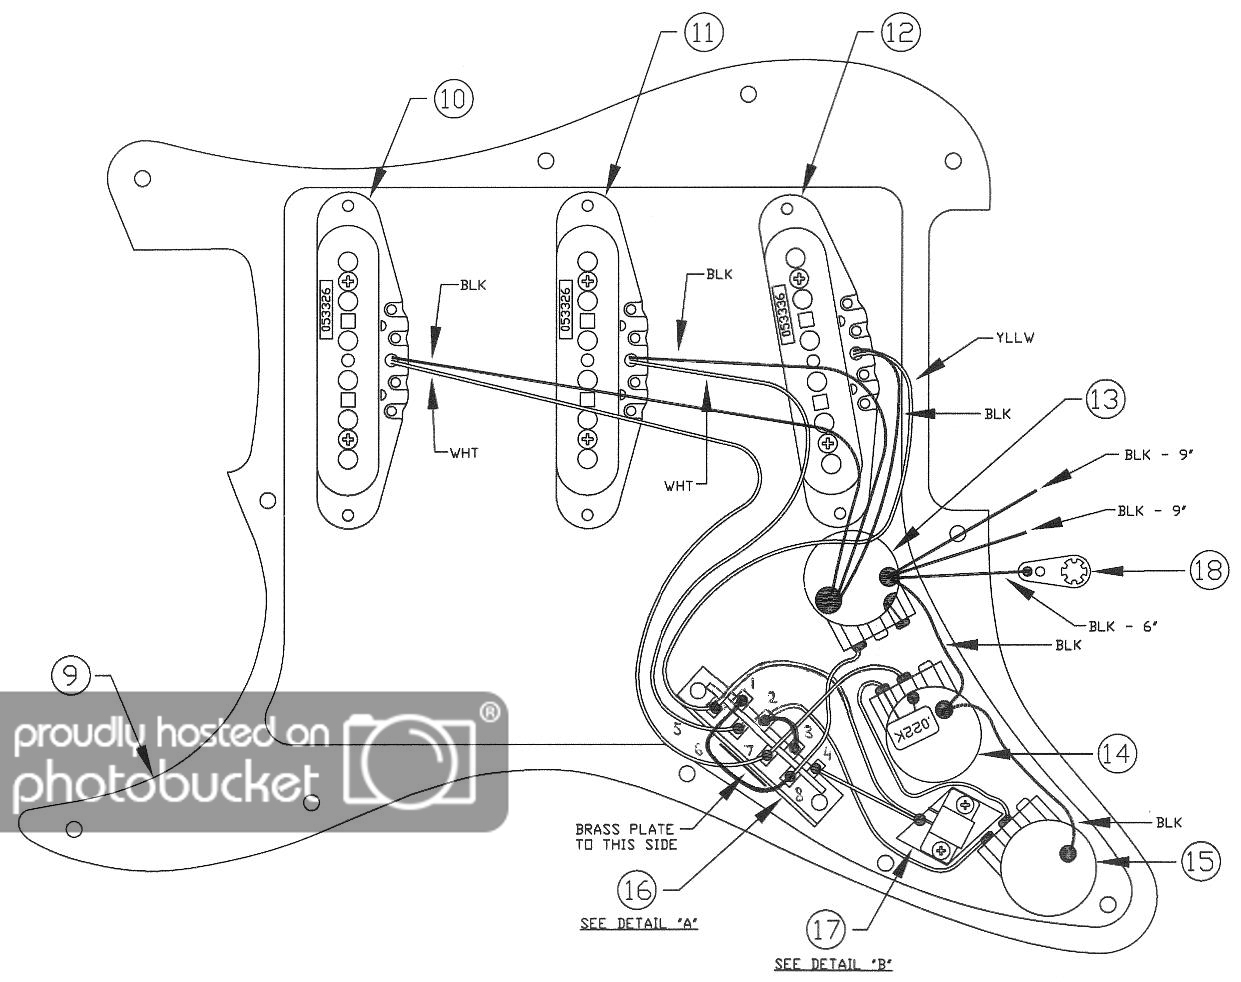 Deluxe Player Strat - Wiring ? | The Gear Page - Fender Strat Wiring Diagram